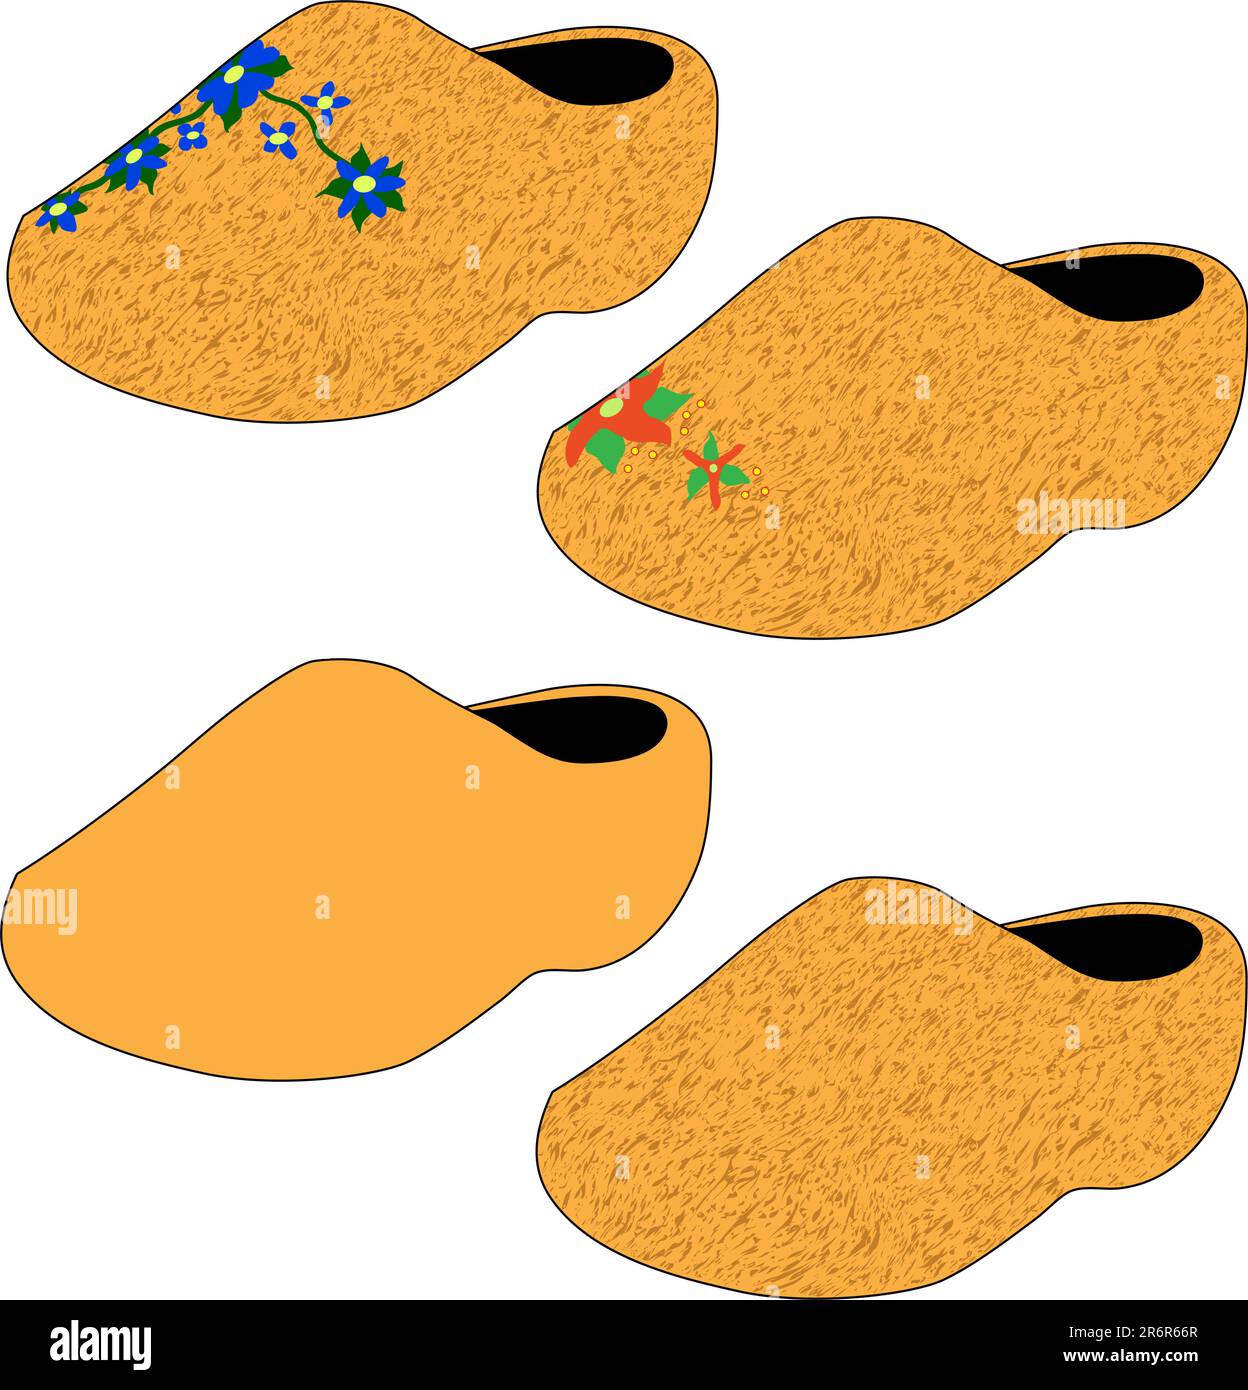 Wooden shoes with various textures and decorations - vector illustration Stock Vector